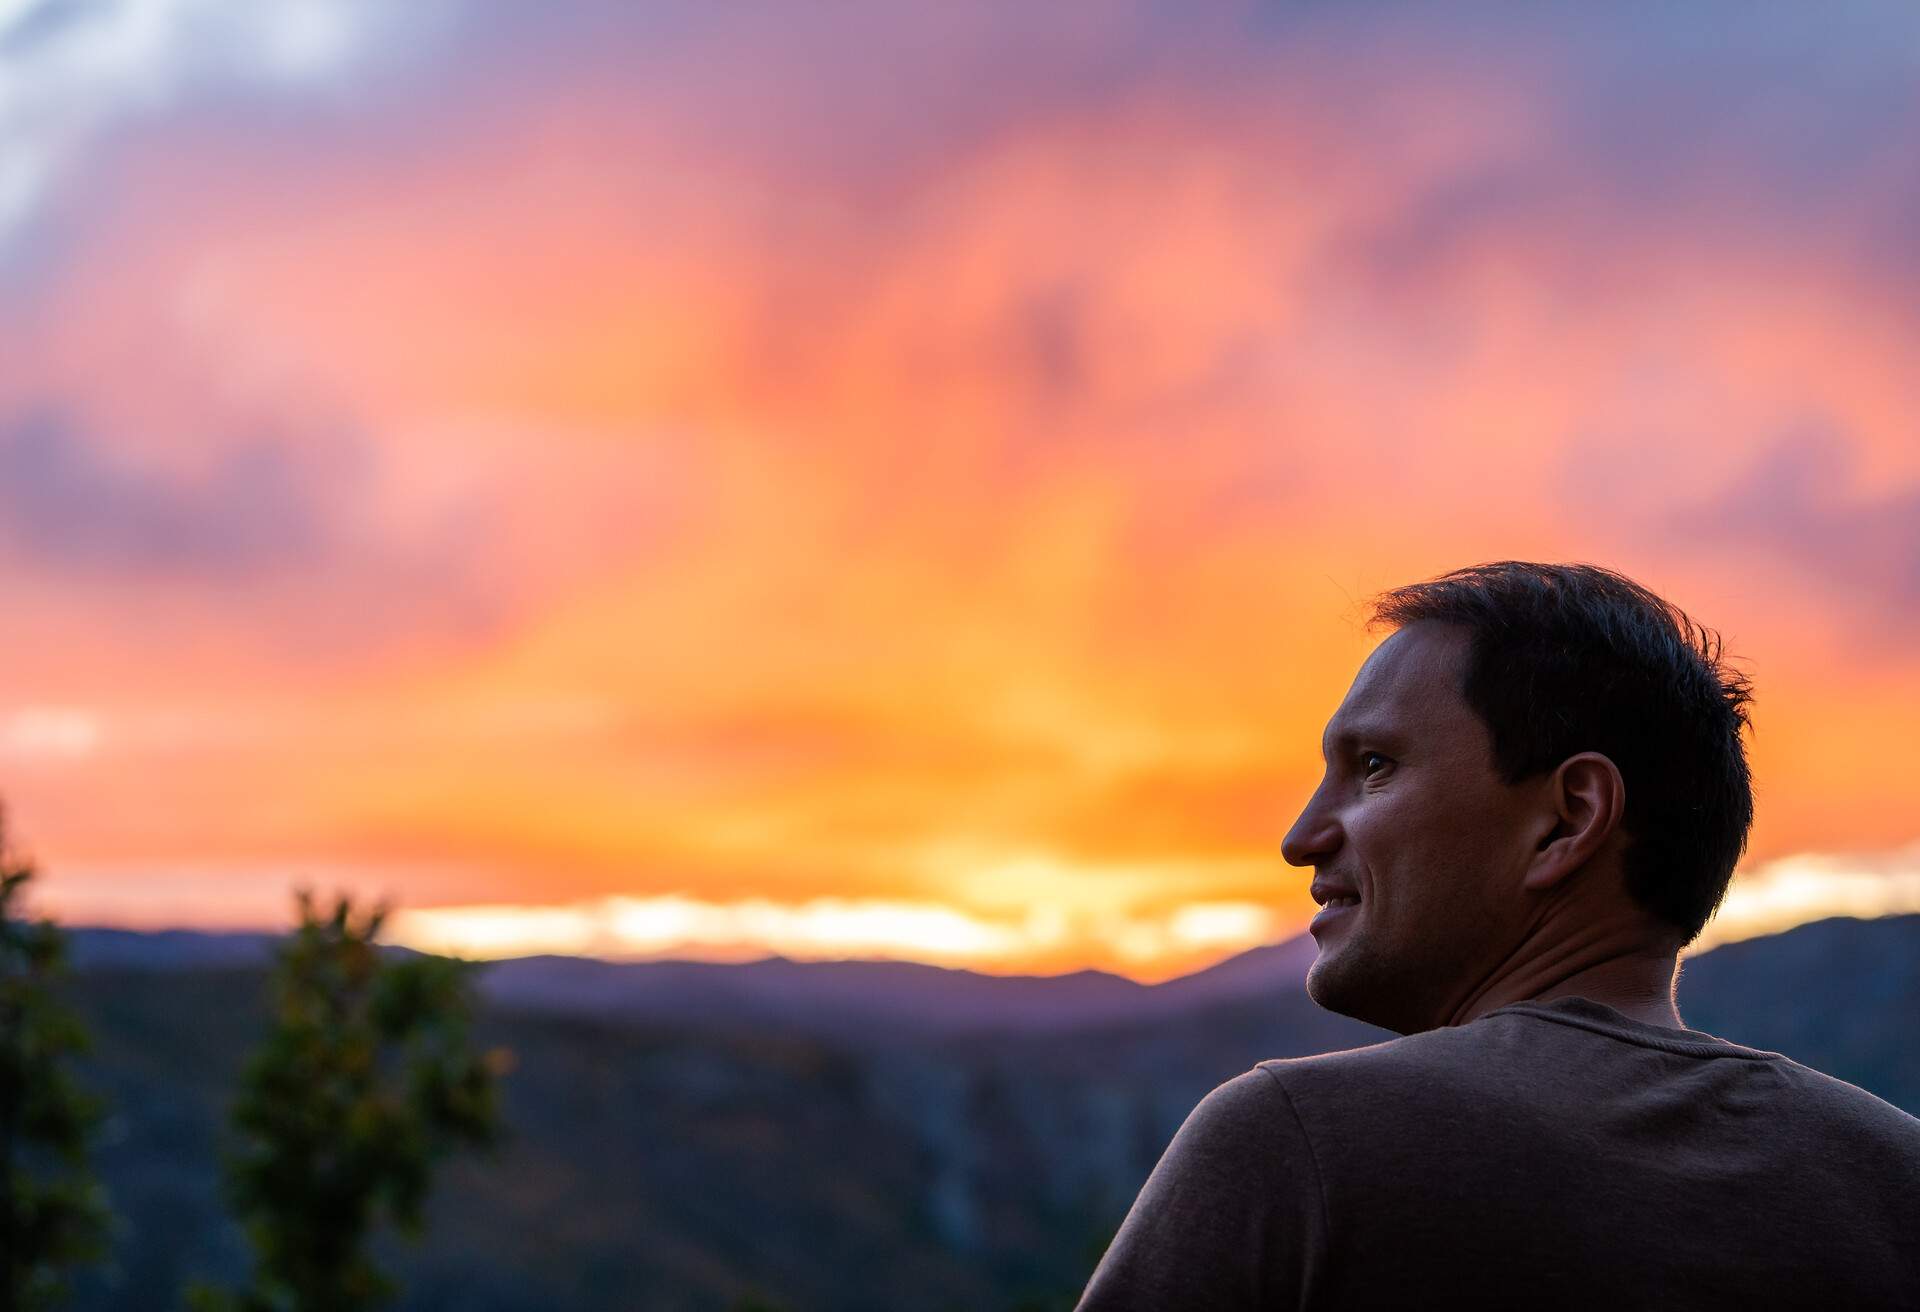 Aspen, Colorado rocky mountains colorful sunset in blurry background with back of young man looking at view at twilight